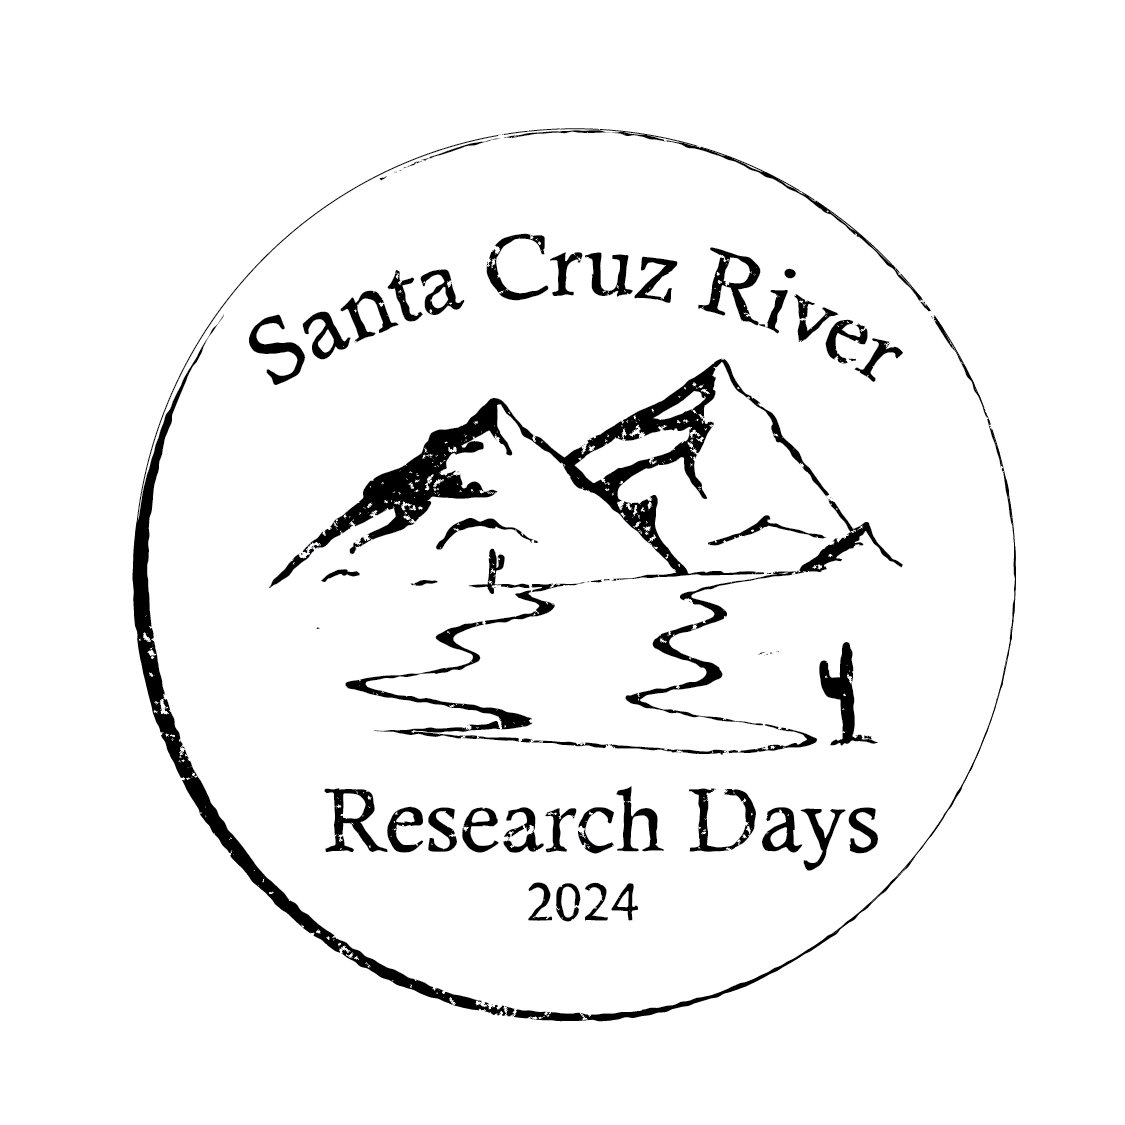 Registration is filling up quickly for our #SantaCruzRiverResearchDays this April 24 - 26. Check out the full program, we hope you can join us! Thank you to our partners and sponsor that keep this event FREE to the public! sonoraninstitute.org/events/scrrd-2…